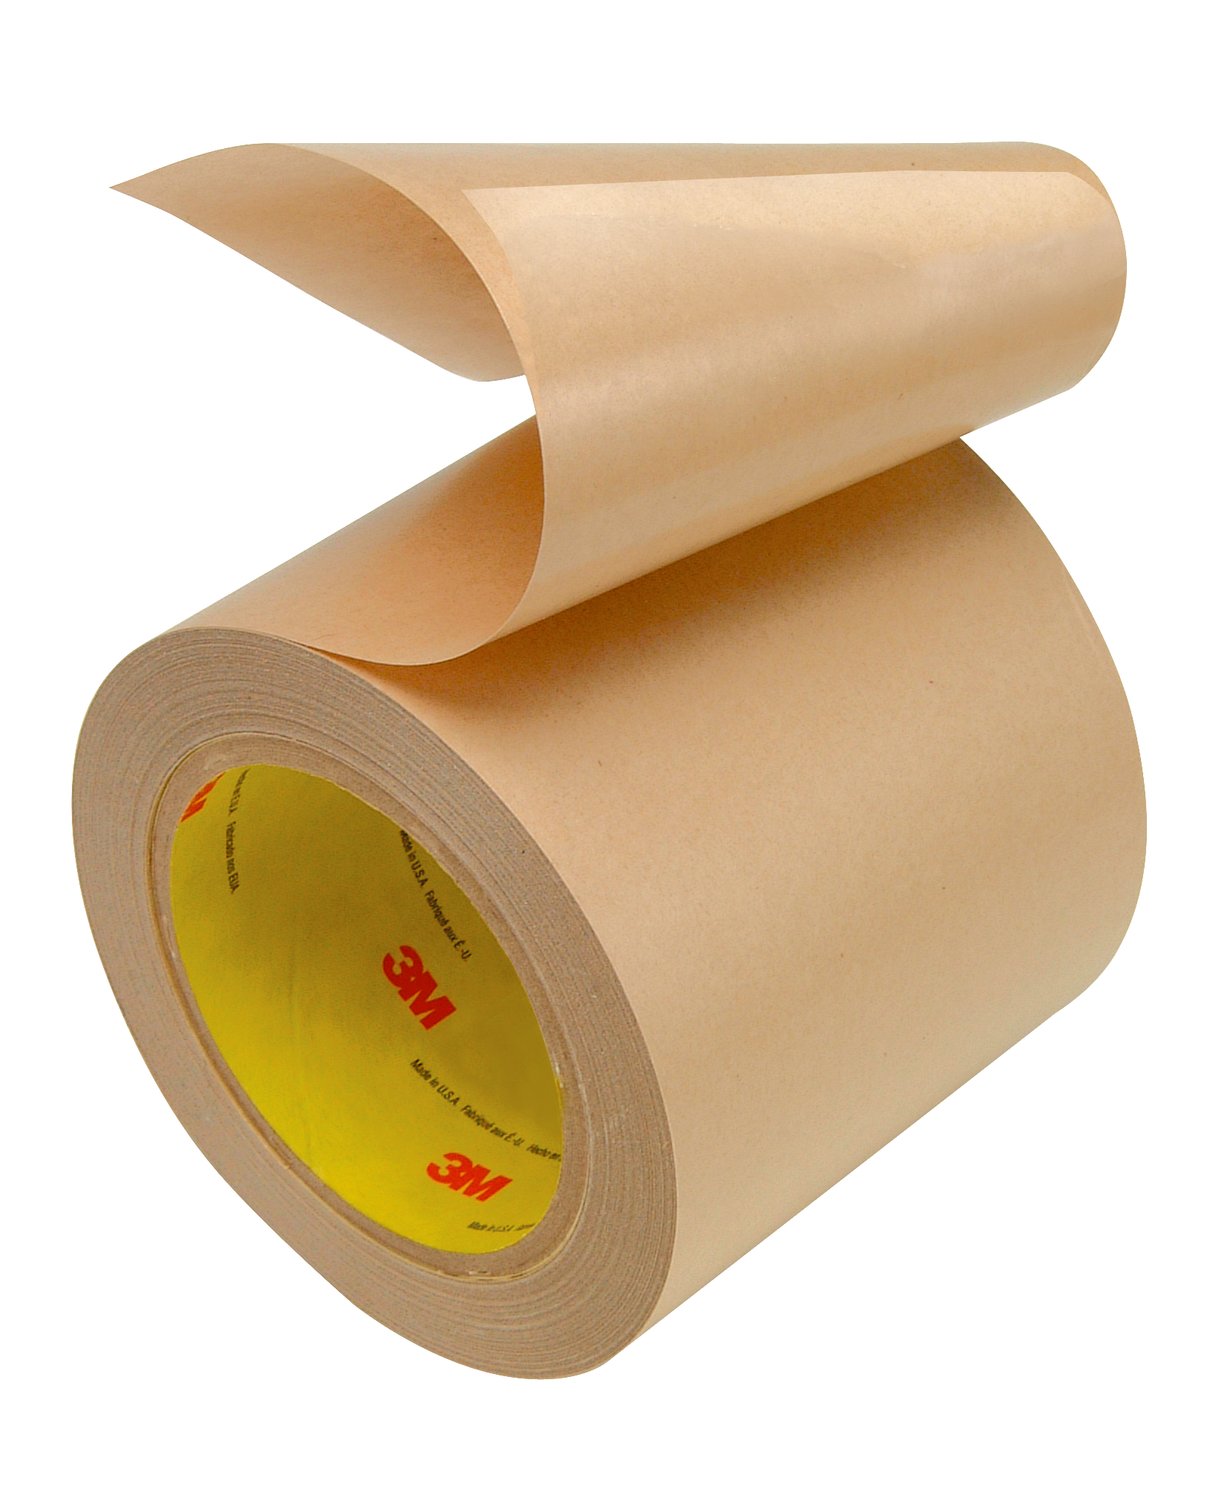 7010373888 - 3M Electrically Conductive Adhesive Transfer Tape 9703, 24 in x 108
yds, 1 roll per case